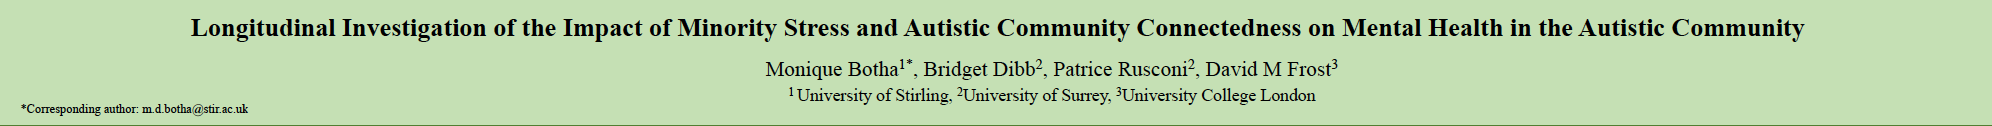 INSAR poster: Longitudinal Investigation of the Impact of Minority Stress and Autistic Community Connectedness on Mental Health in the Autistic Community